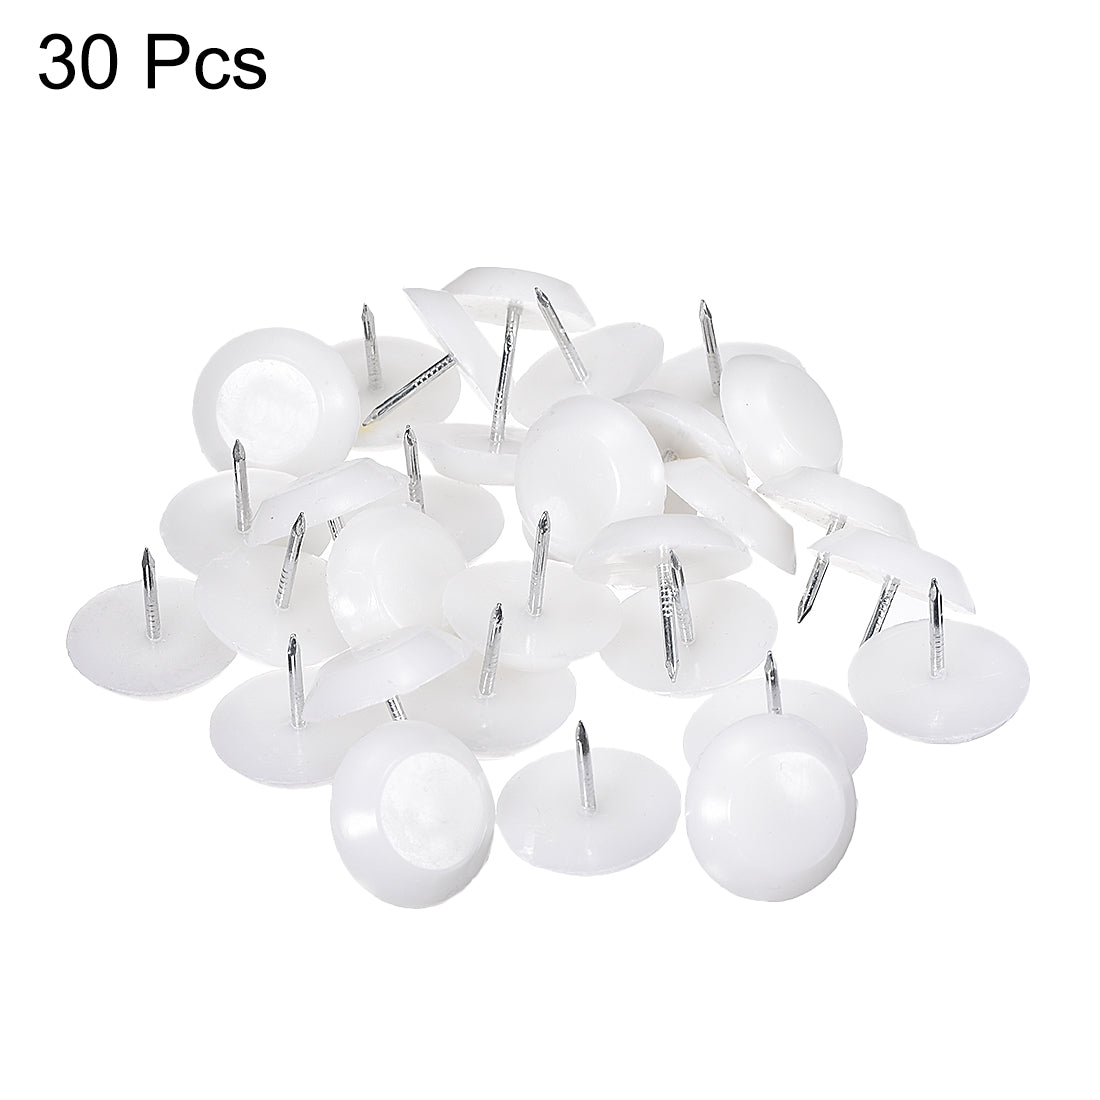 uxcell Uxcell Furniture Feet Nail Chair Table Leg Protector Pad 22mm Dia White Plastic 30pcs